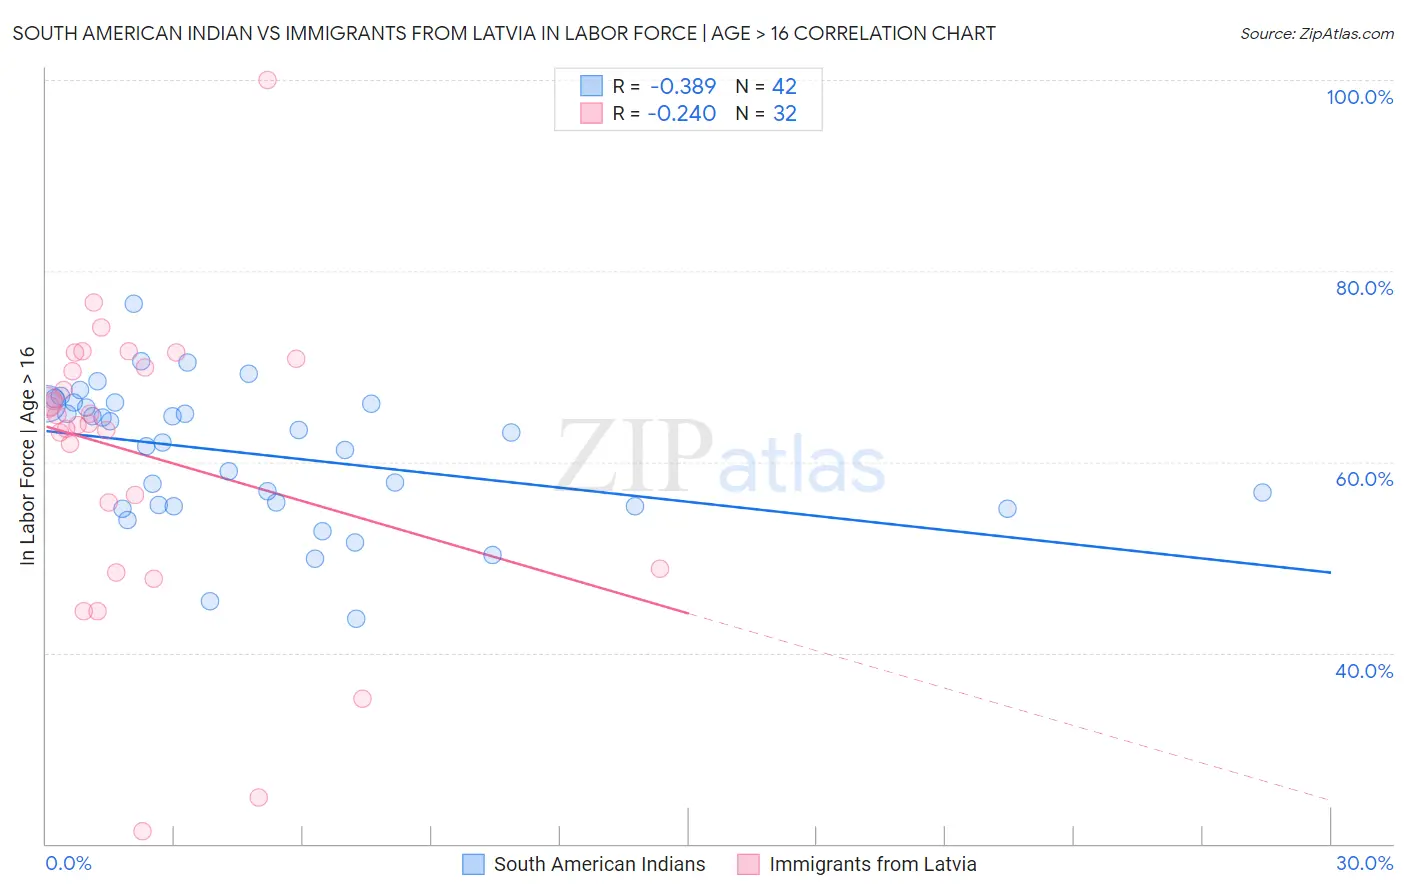 South American Indian vs Immigrants from Latvia In Labor Force | Age > 16